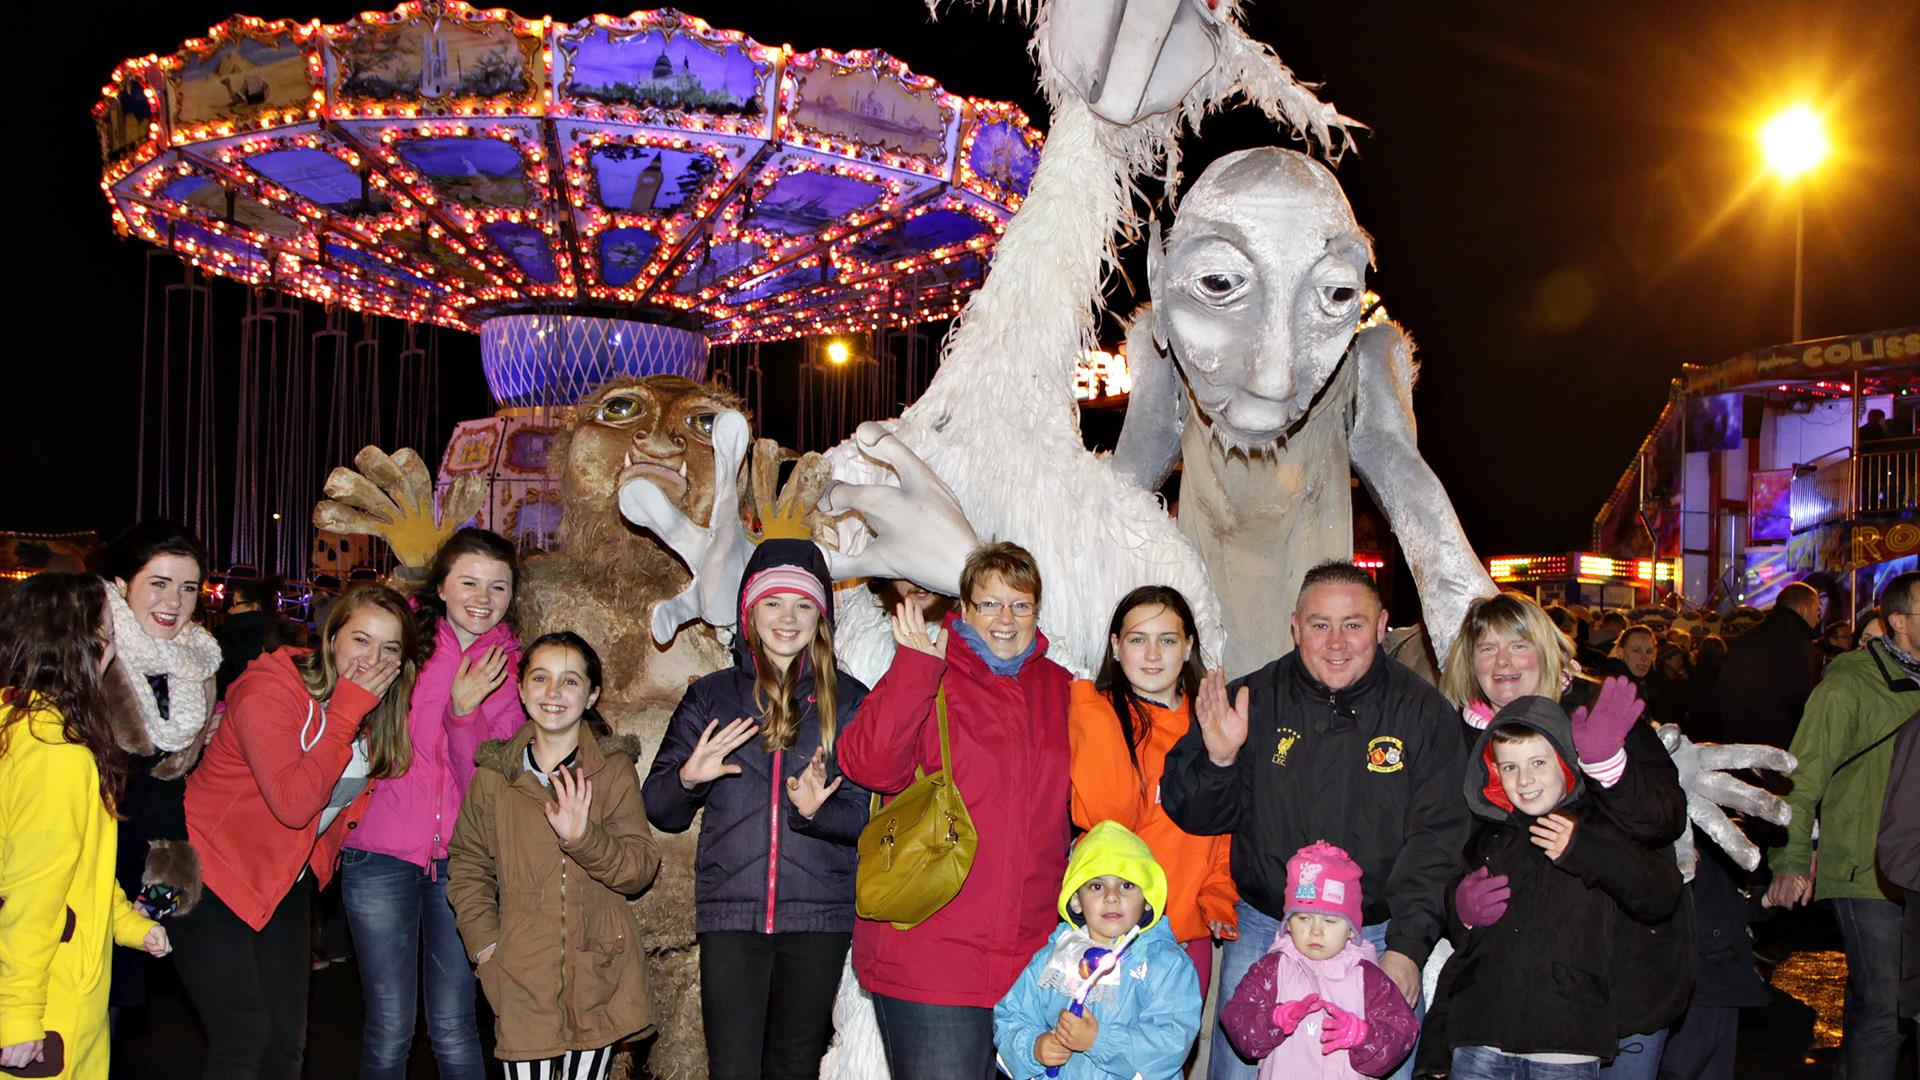 Image shows a group of people standing in front of scary Halloween characters, with a Fairground in the background